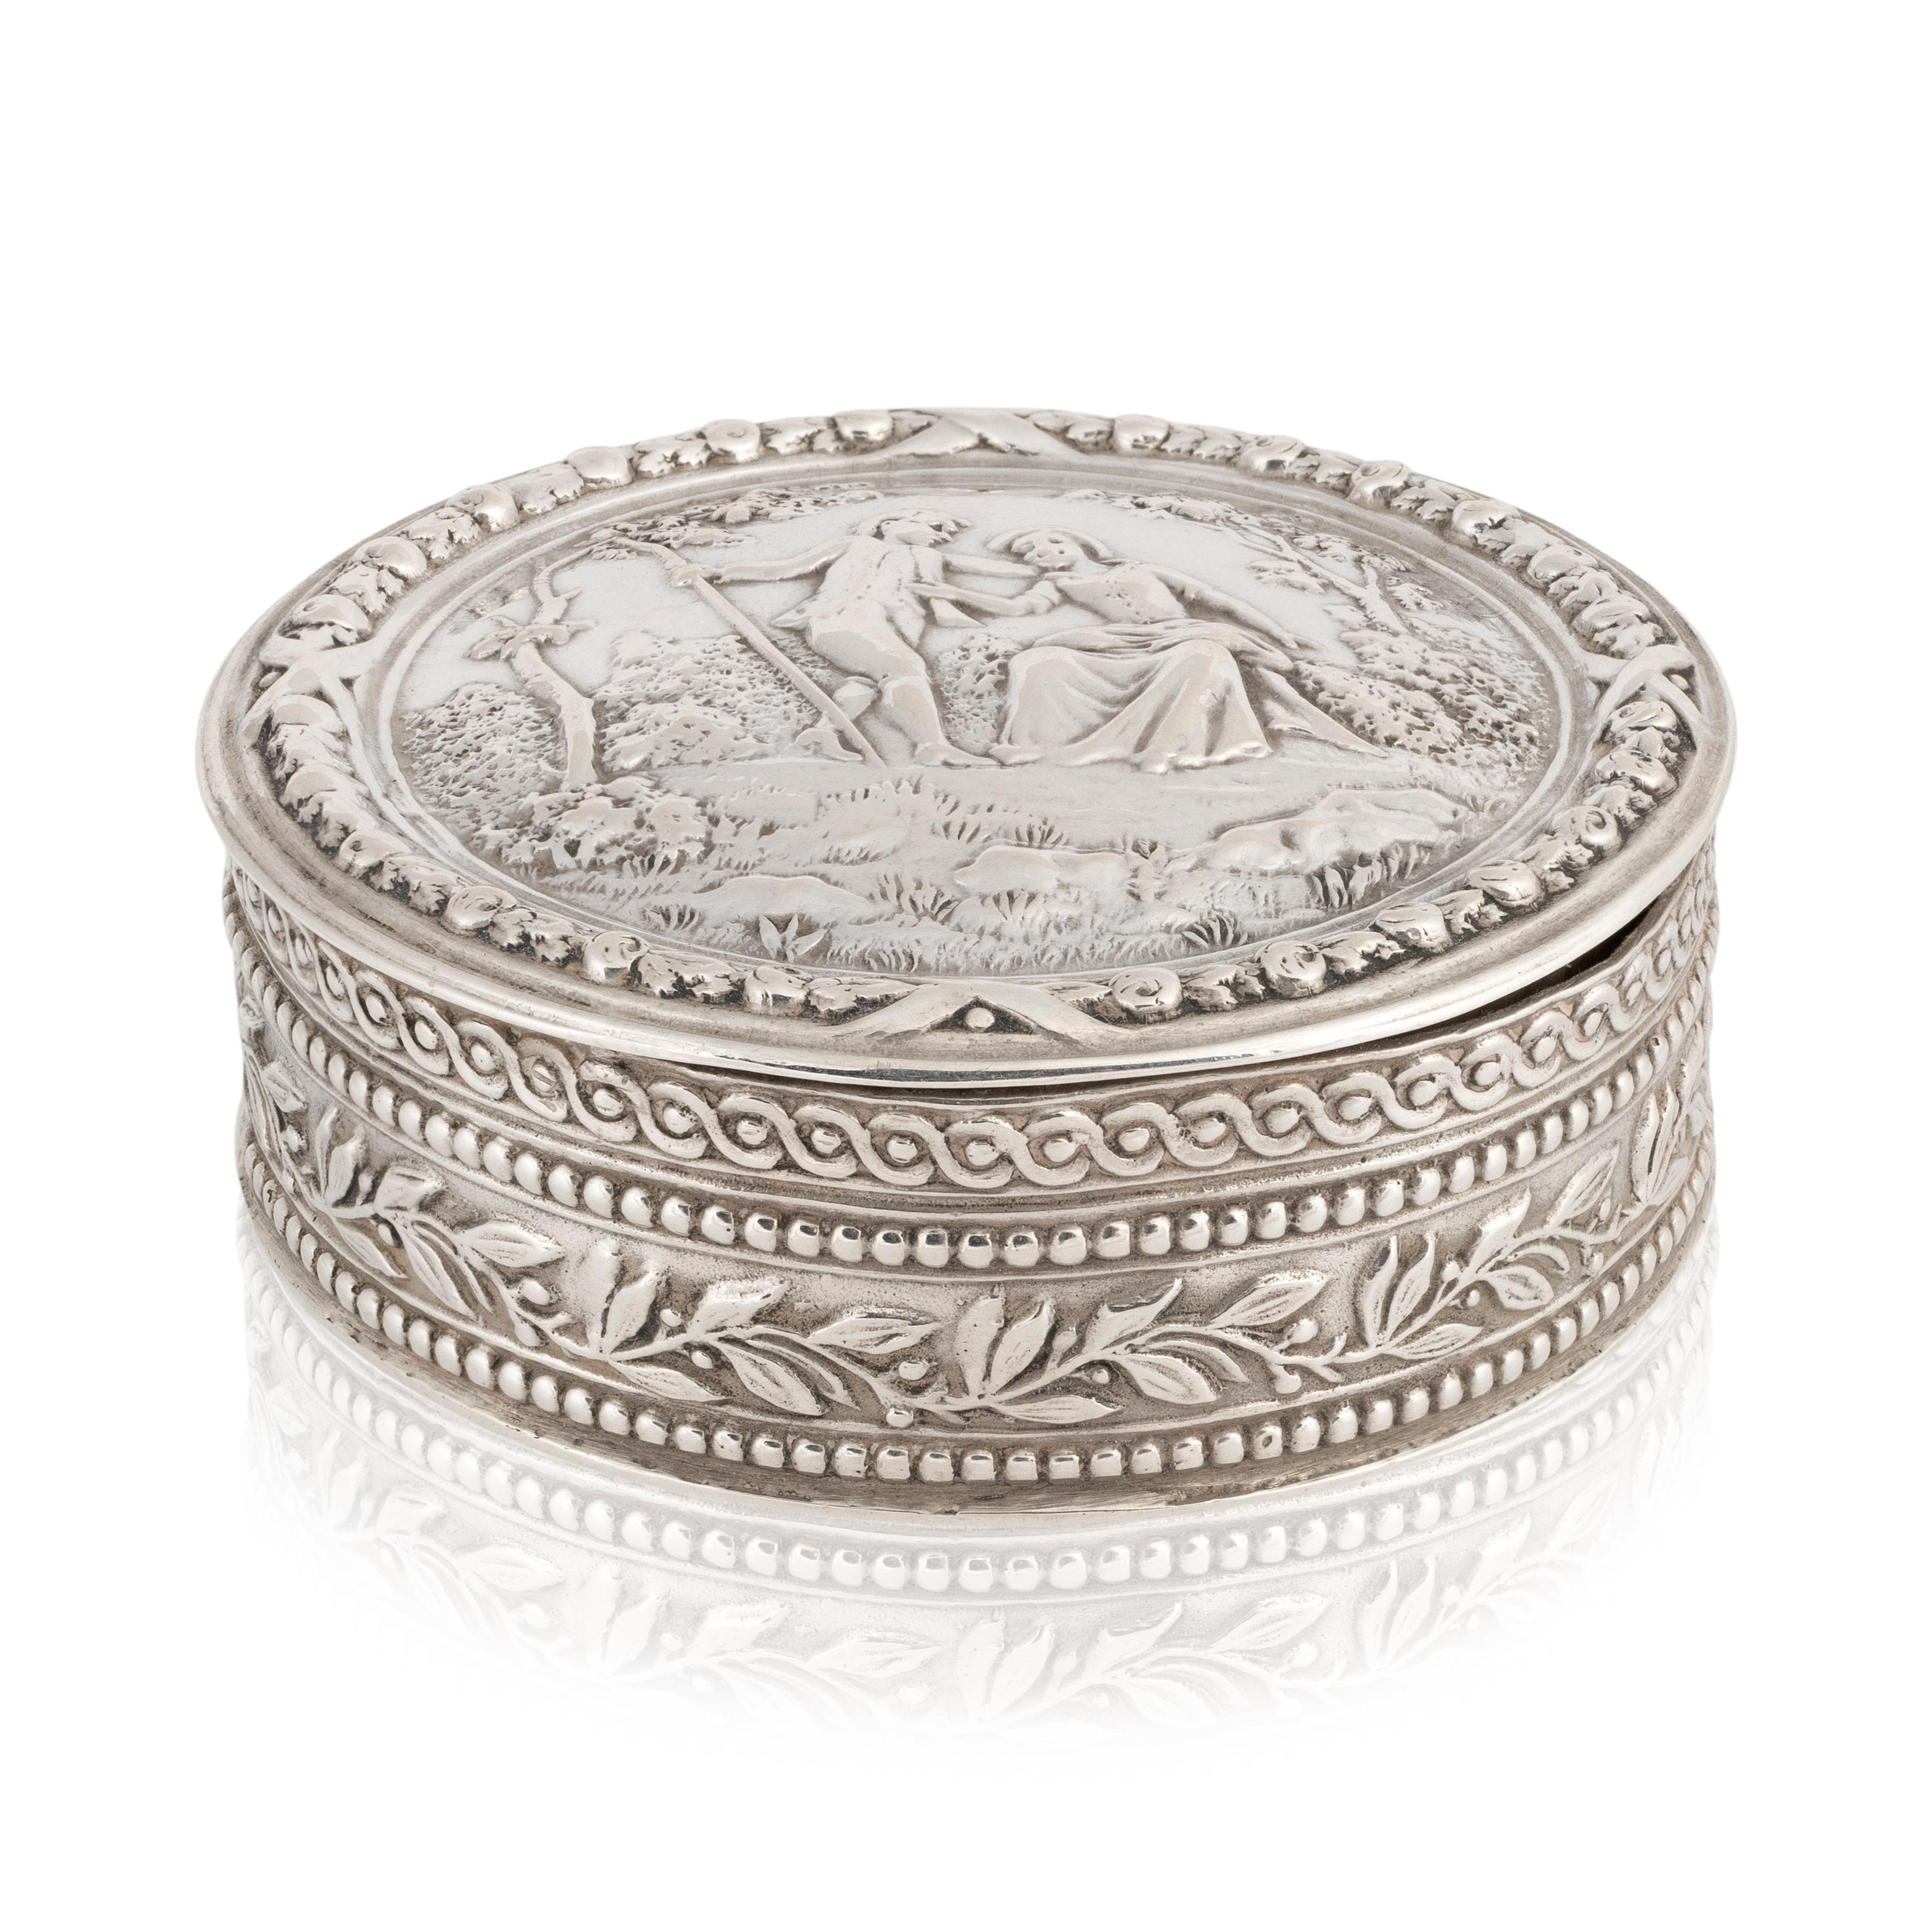 Eight sided silver lidded box with decorated sides and courting scene. Bottom marked 